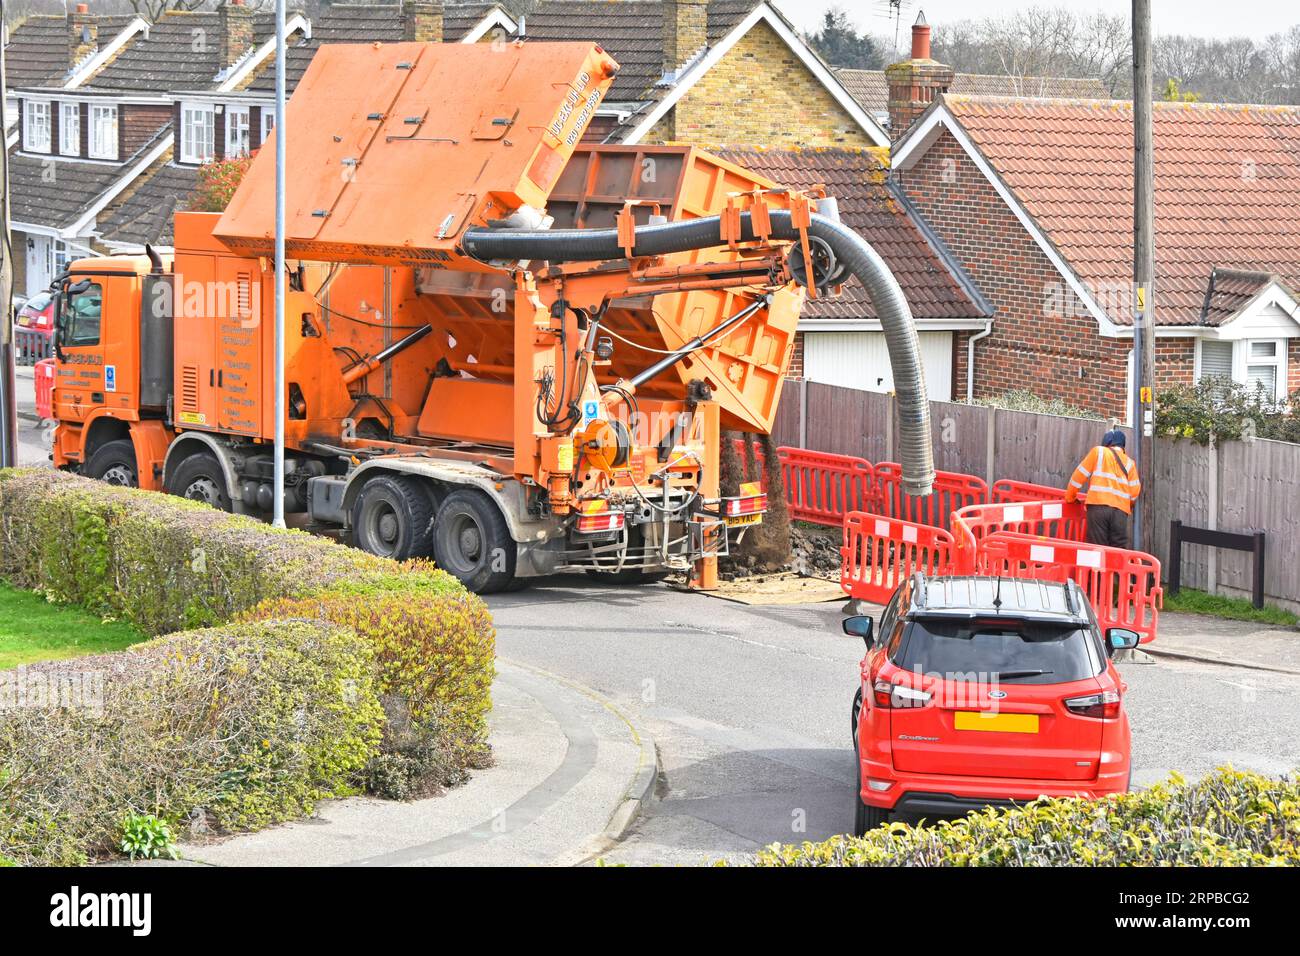 Motorist waits & watches lift tip & empty full storage bin of earth from suction excavation machine on hgv lorry truck into temporary dump compound UK Stock Photo